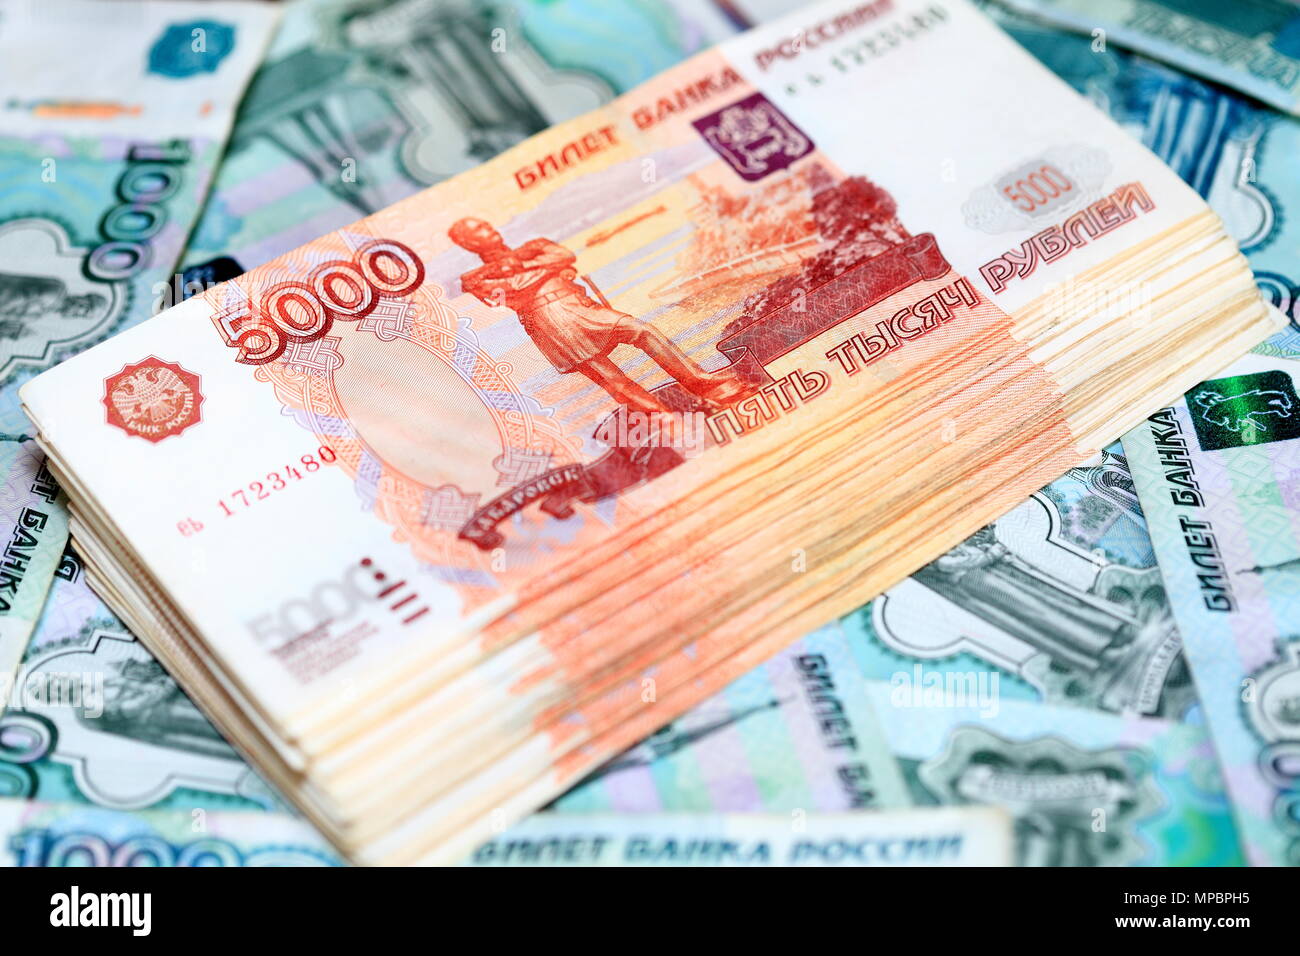 Russian Ruble High Resolution Stock Photography and Images - Alamy